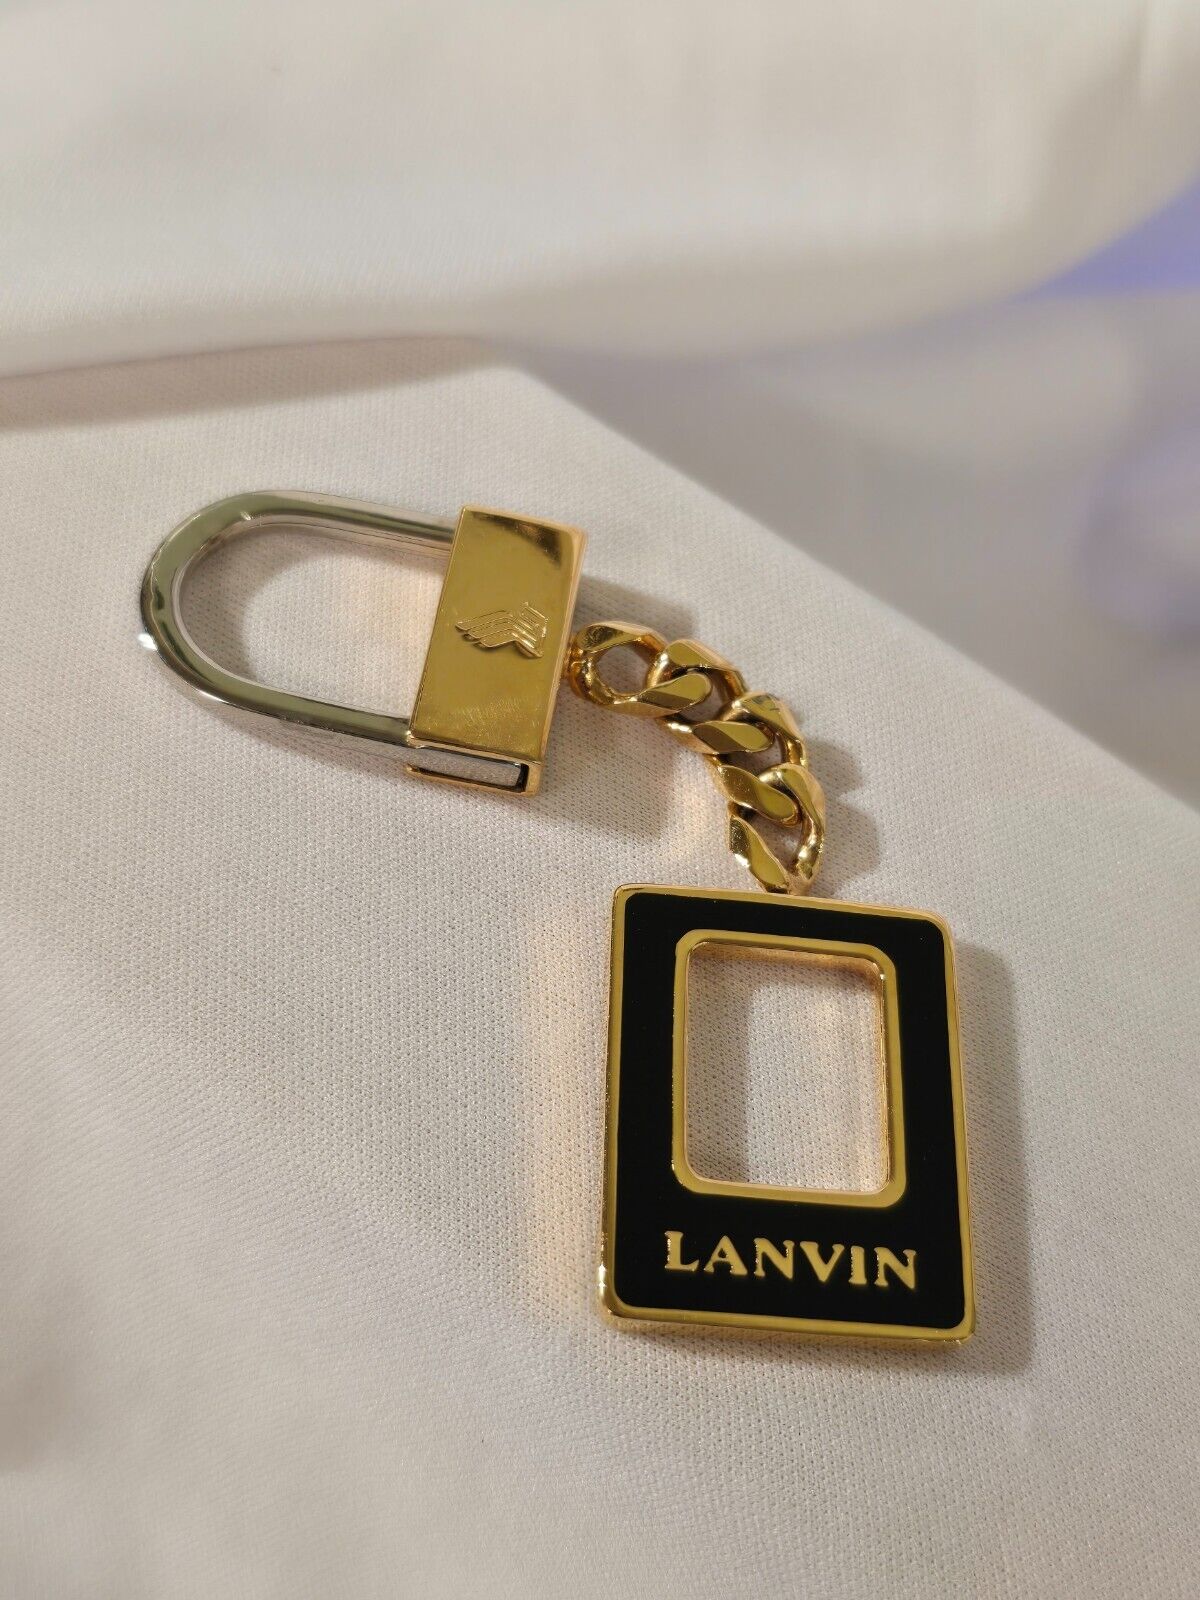 VINTAGE 1980s LANVIN Paris DESIGNER KEYCHAIN BY SINGAPORE AIRLINES TAG FOB Italy